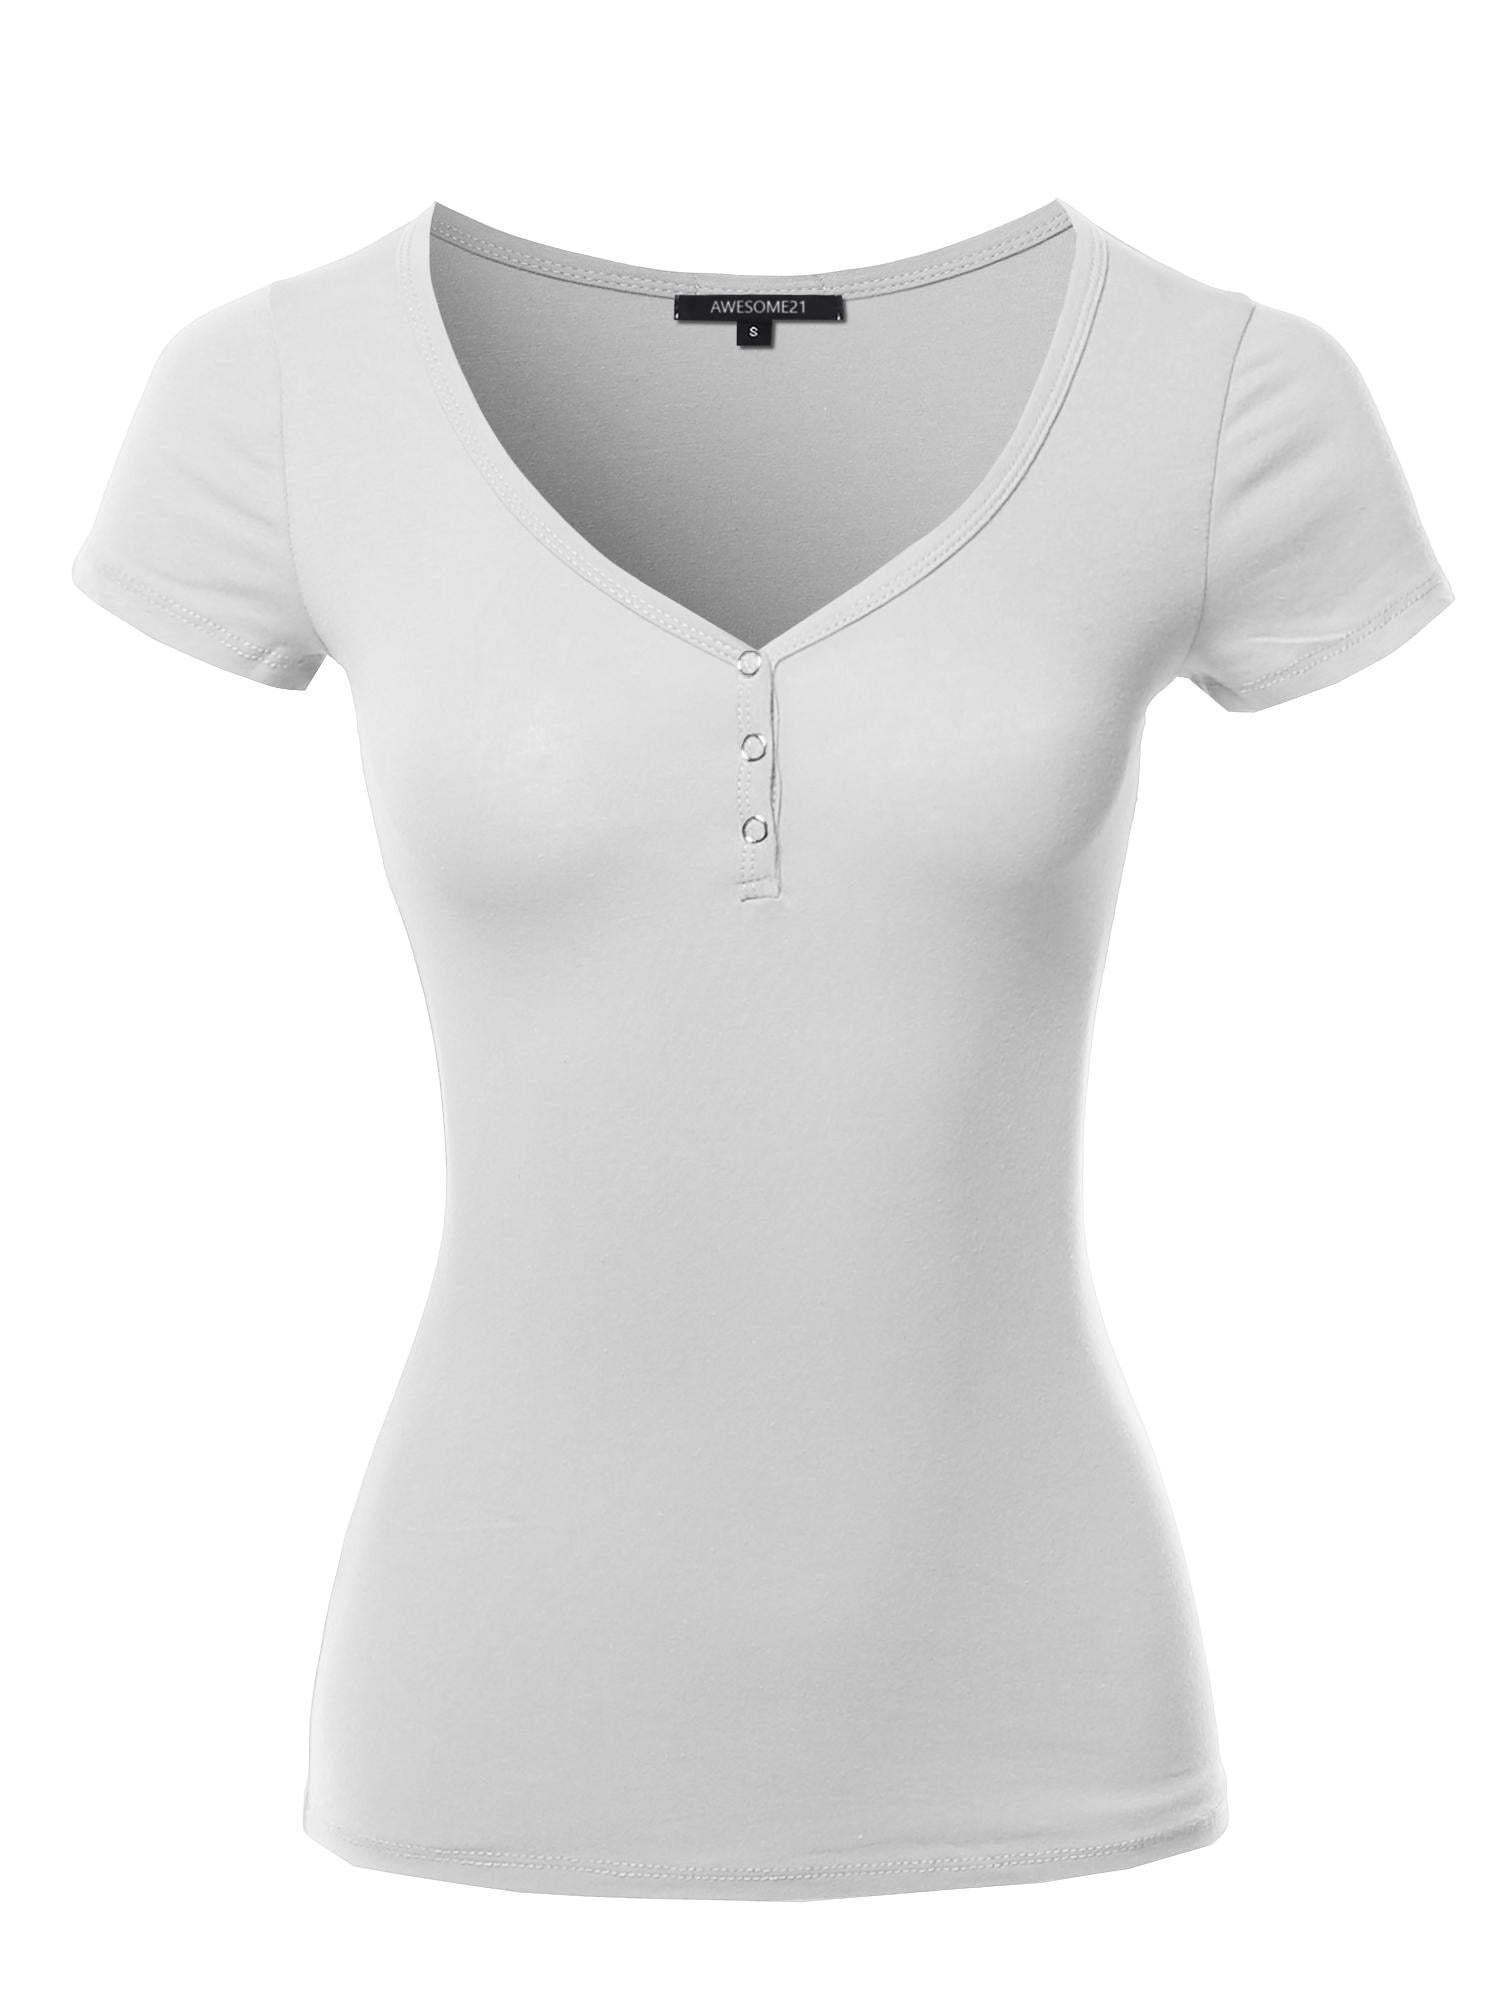 FashionOutfit Women's Solid Short Sleeve Snap Button Henley V-Neck Top ...